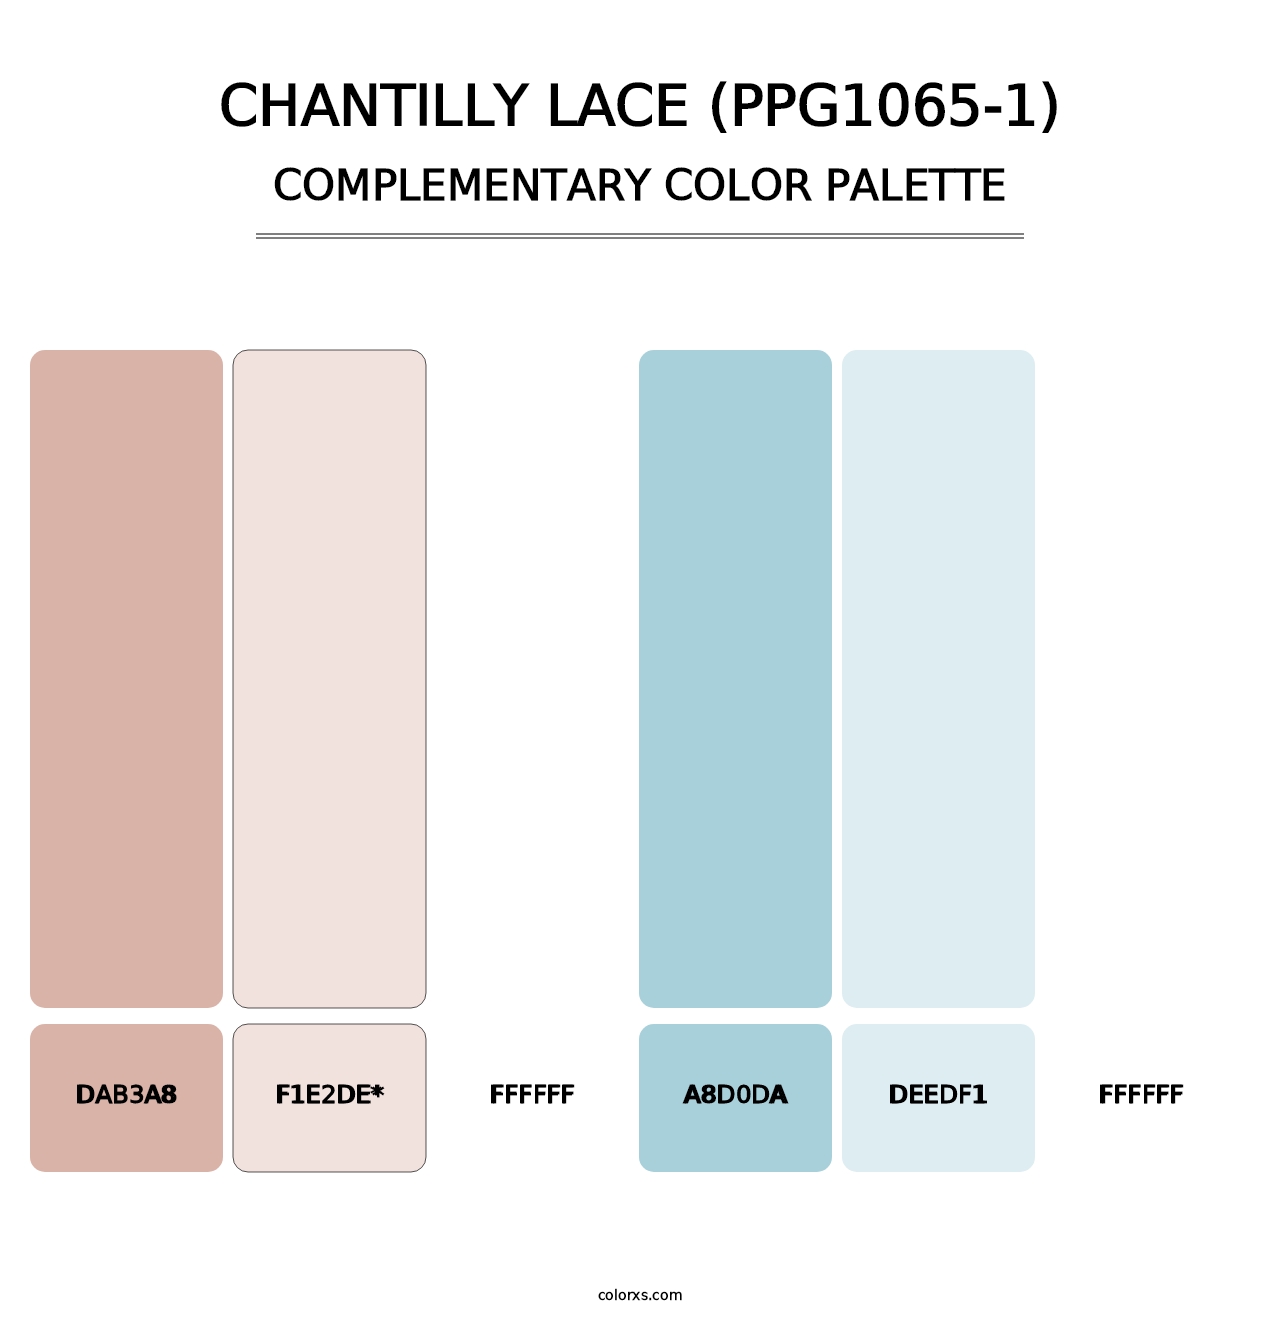 Chantilly Lace (PPG1065-1) - Complementary Color Palette